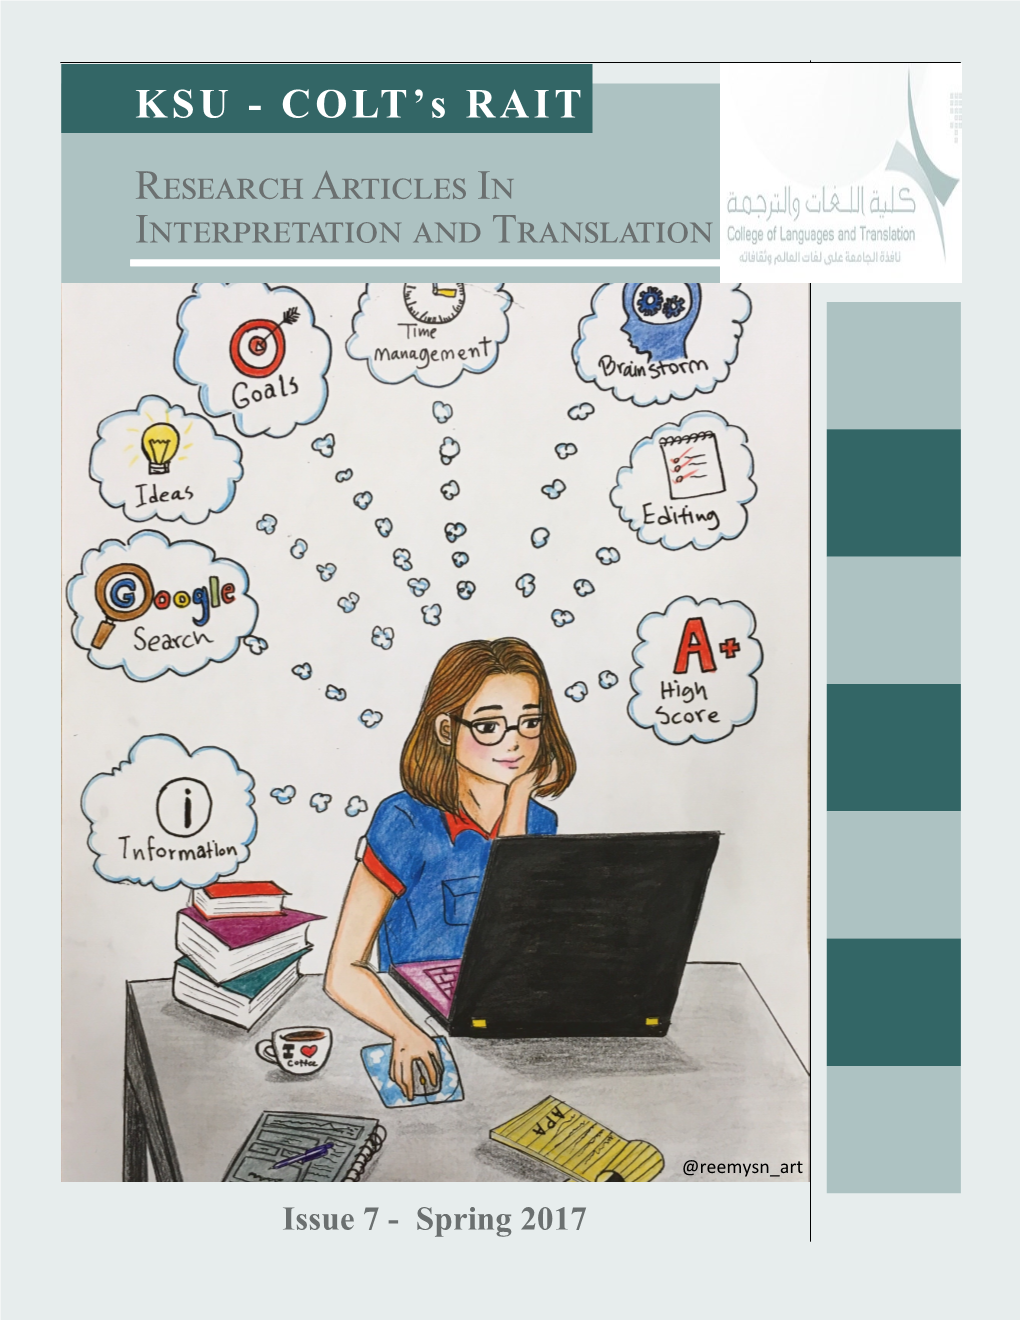 Research Articles in Interpretation and Translation